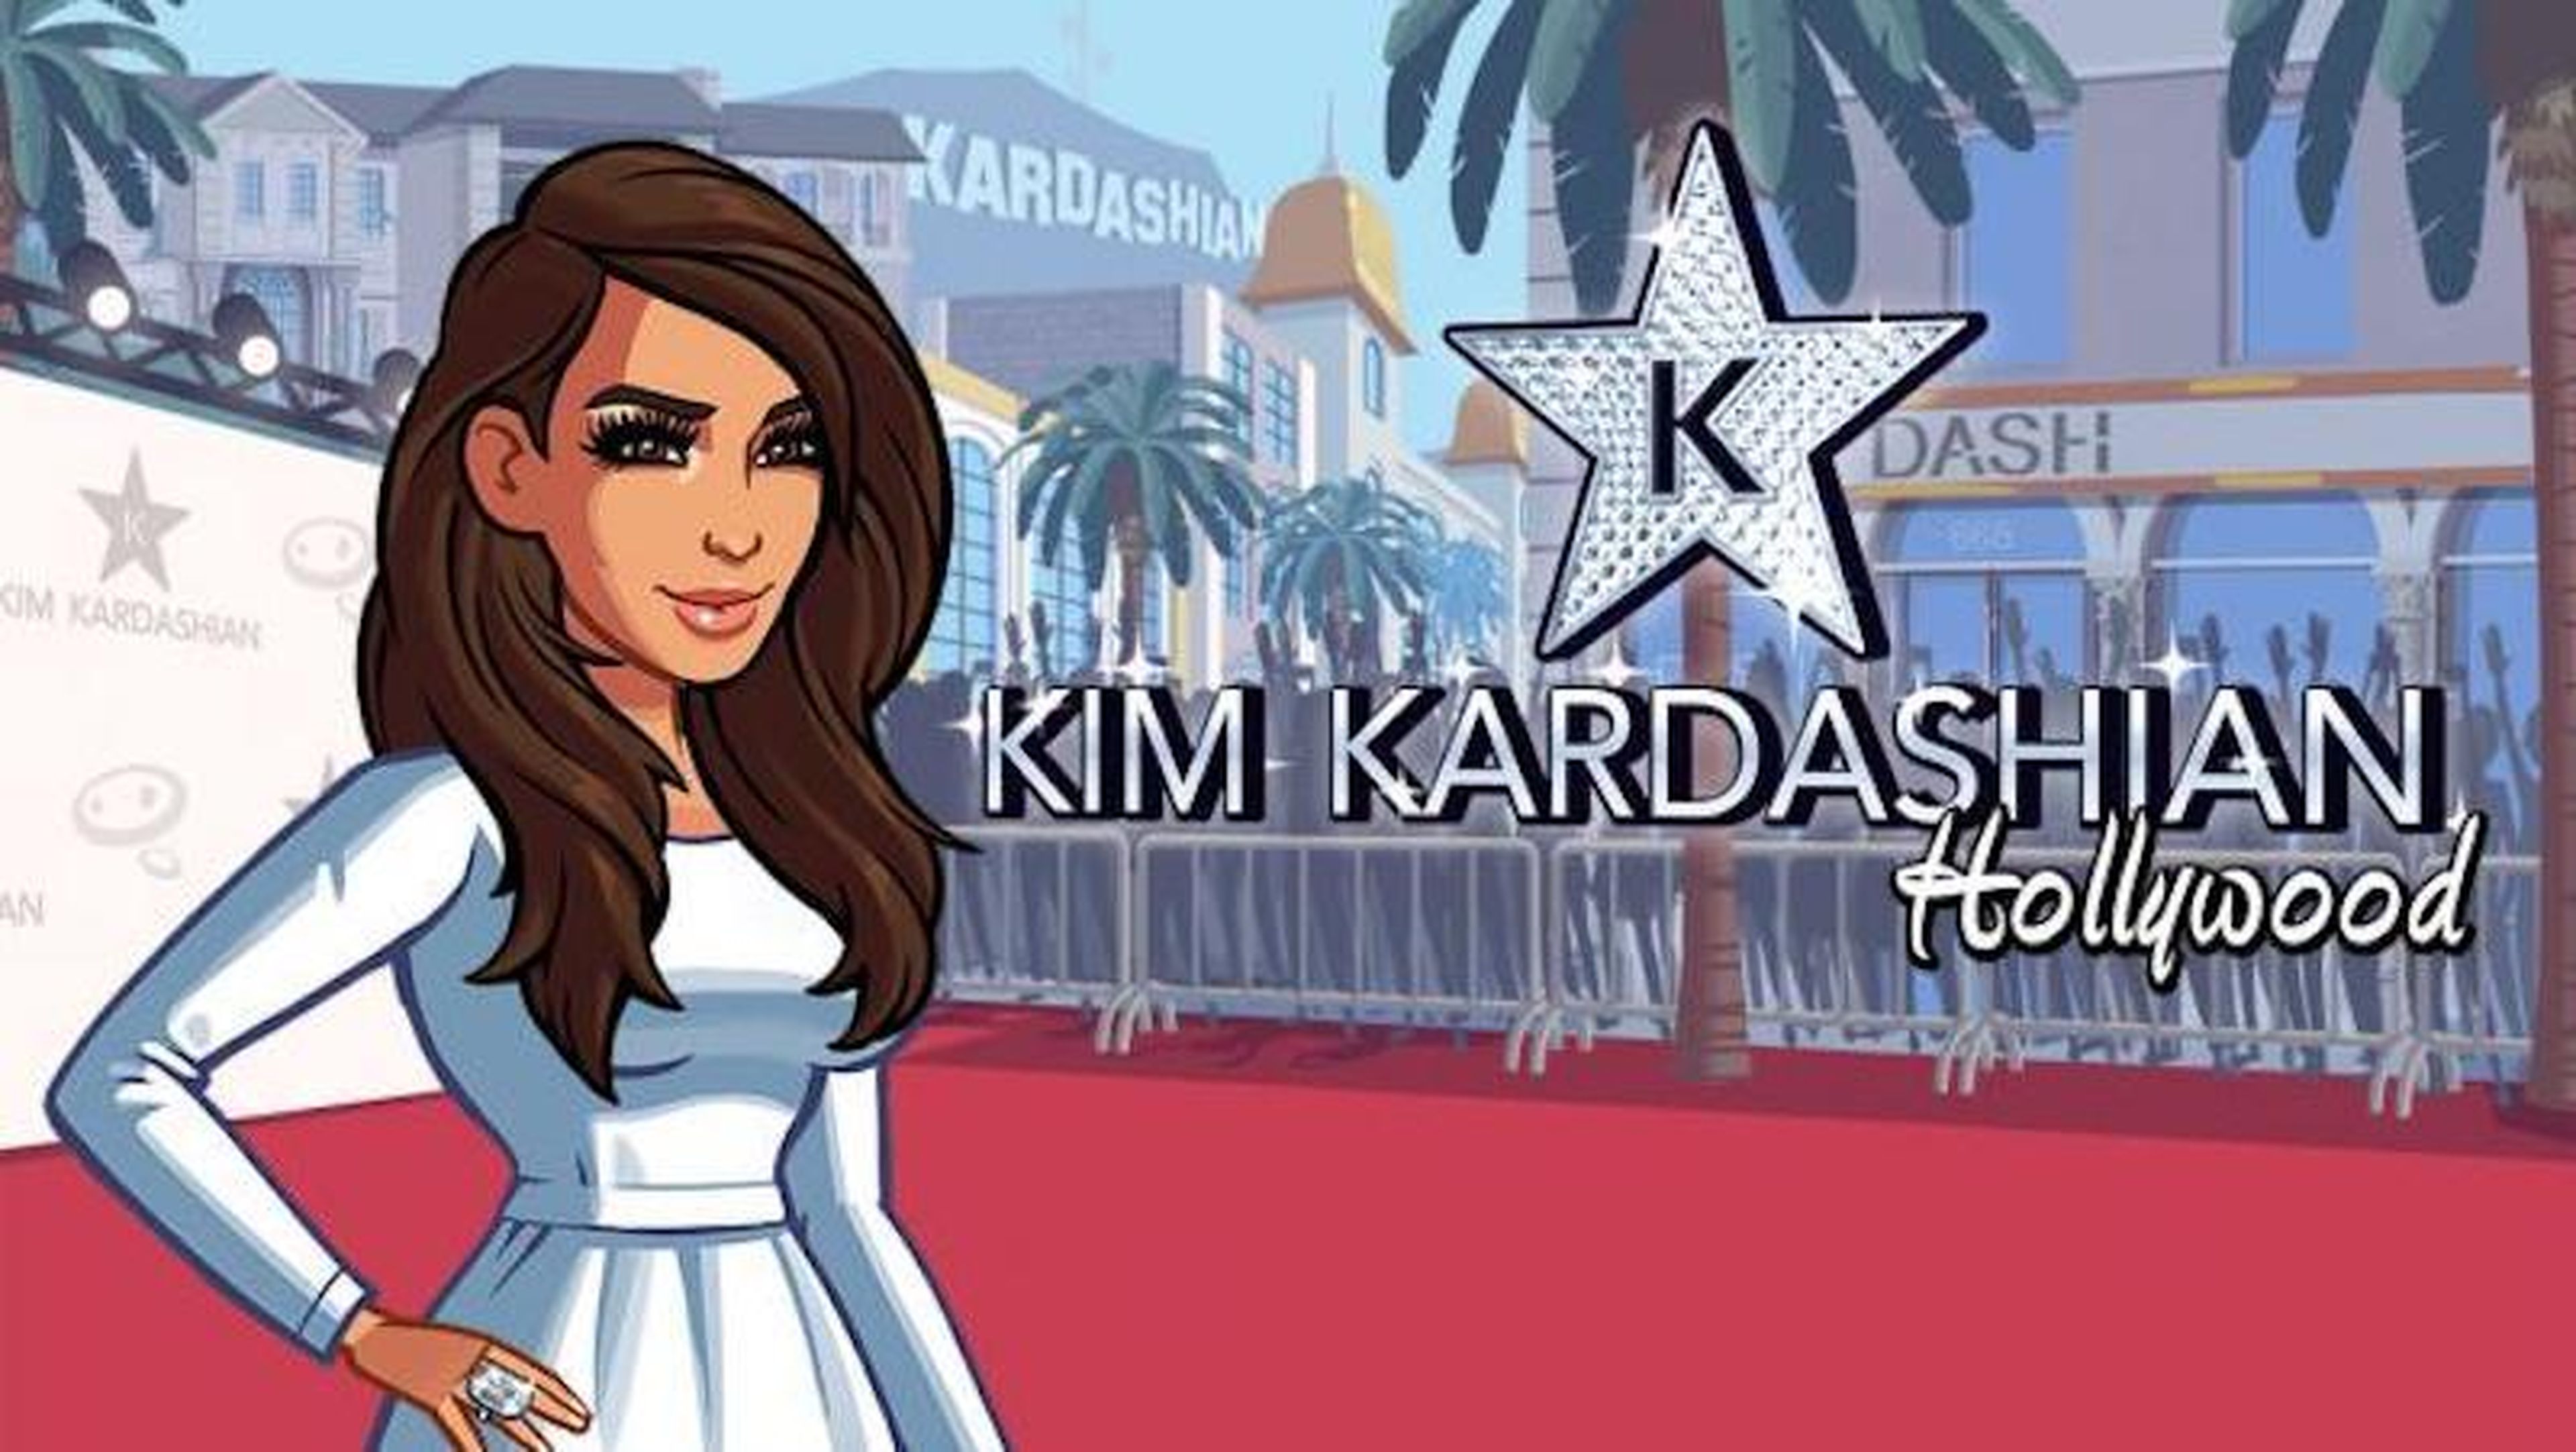 In 2014, Kim released her iPhone and Android game "Kim Kardashian: Hollywood."